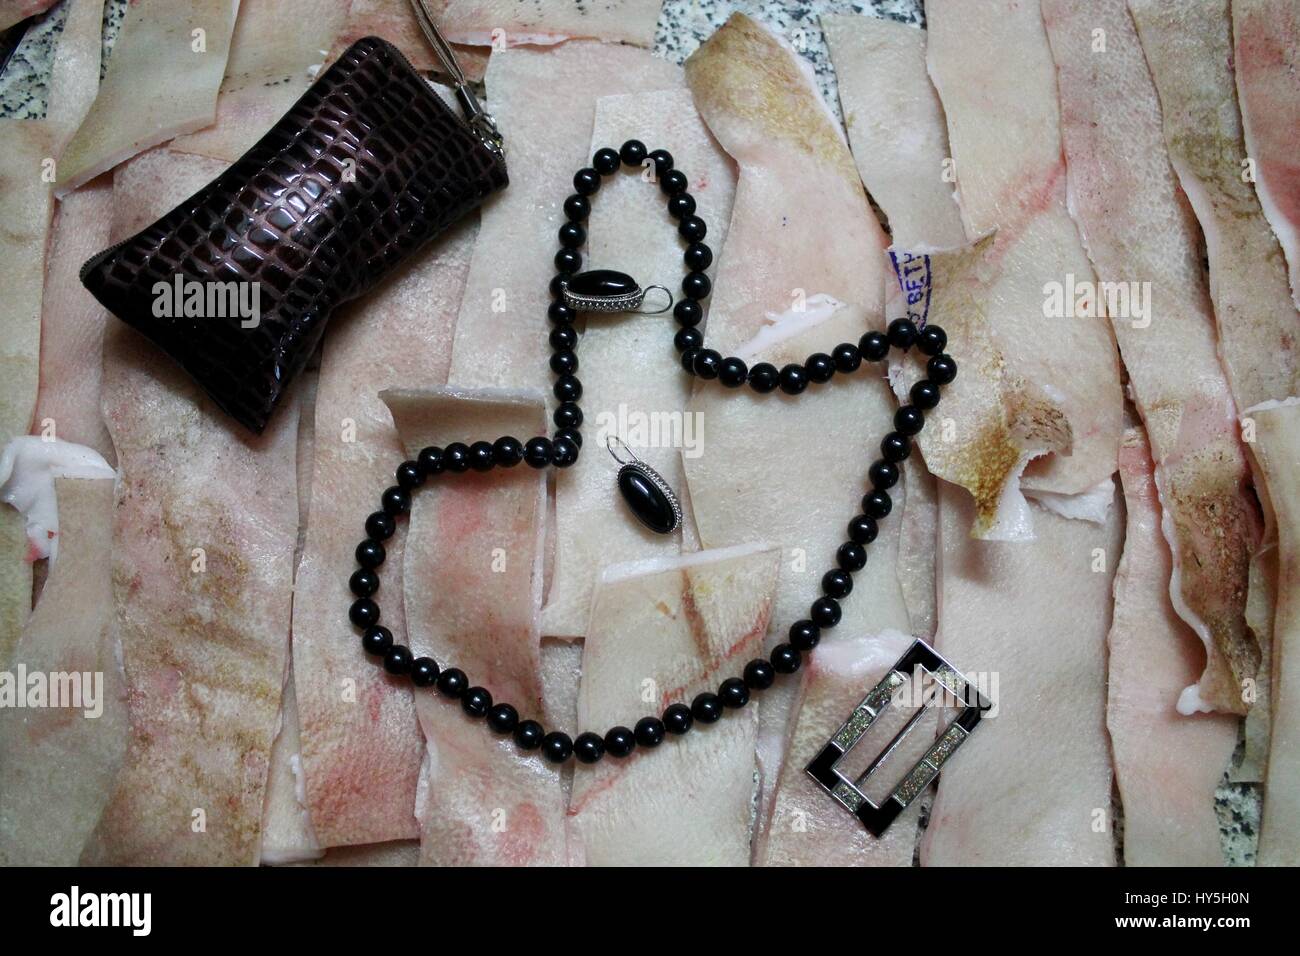 black beads with earrings and purse lay on pink fresh pork skin Stock Photo